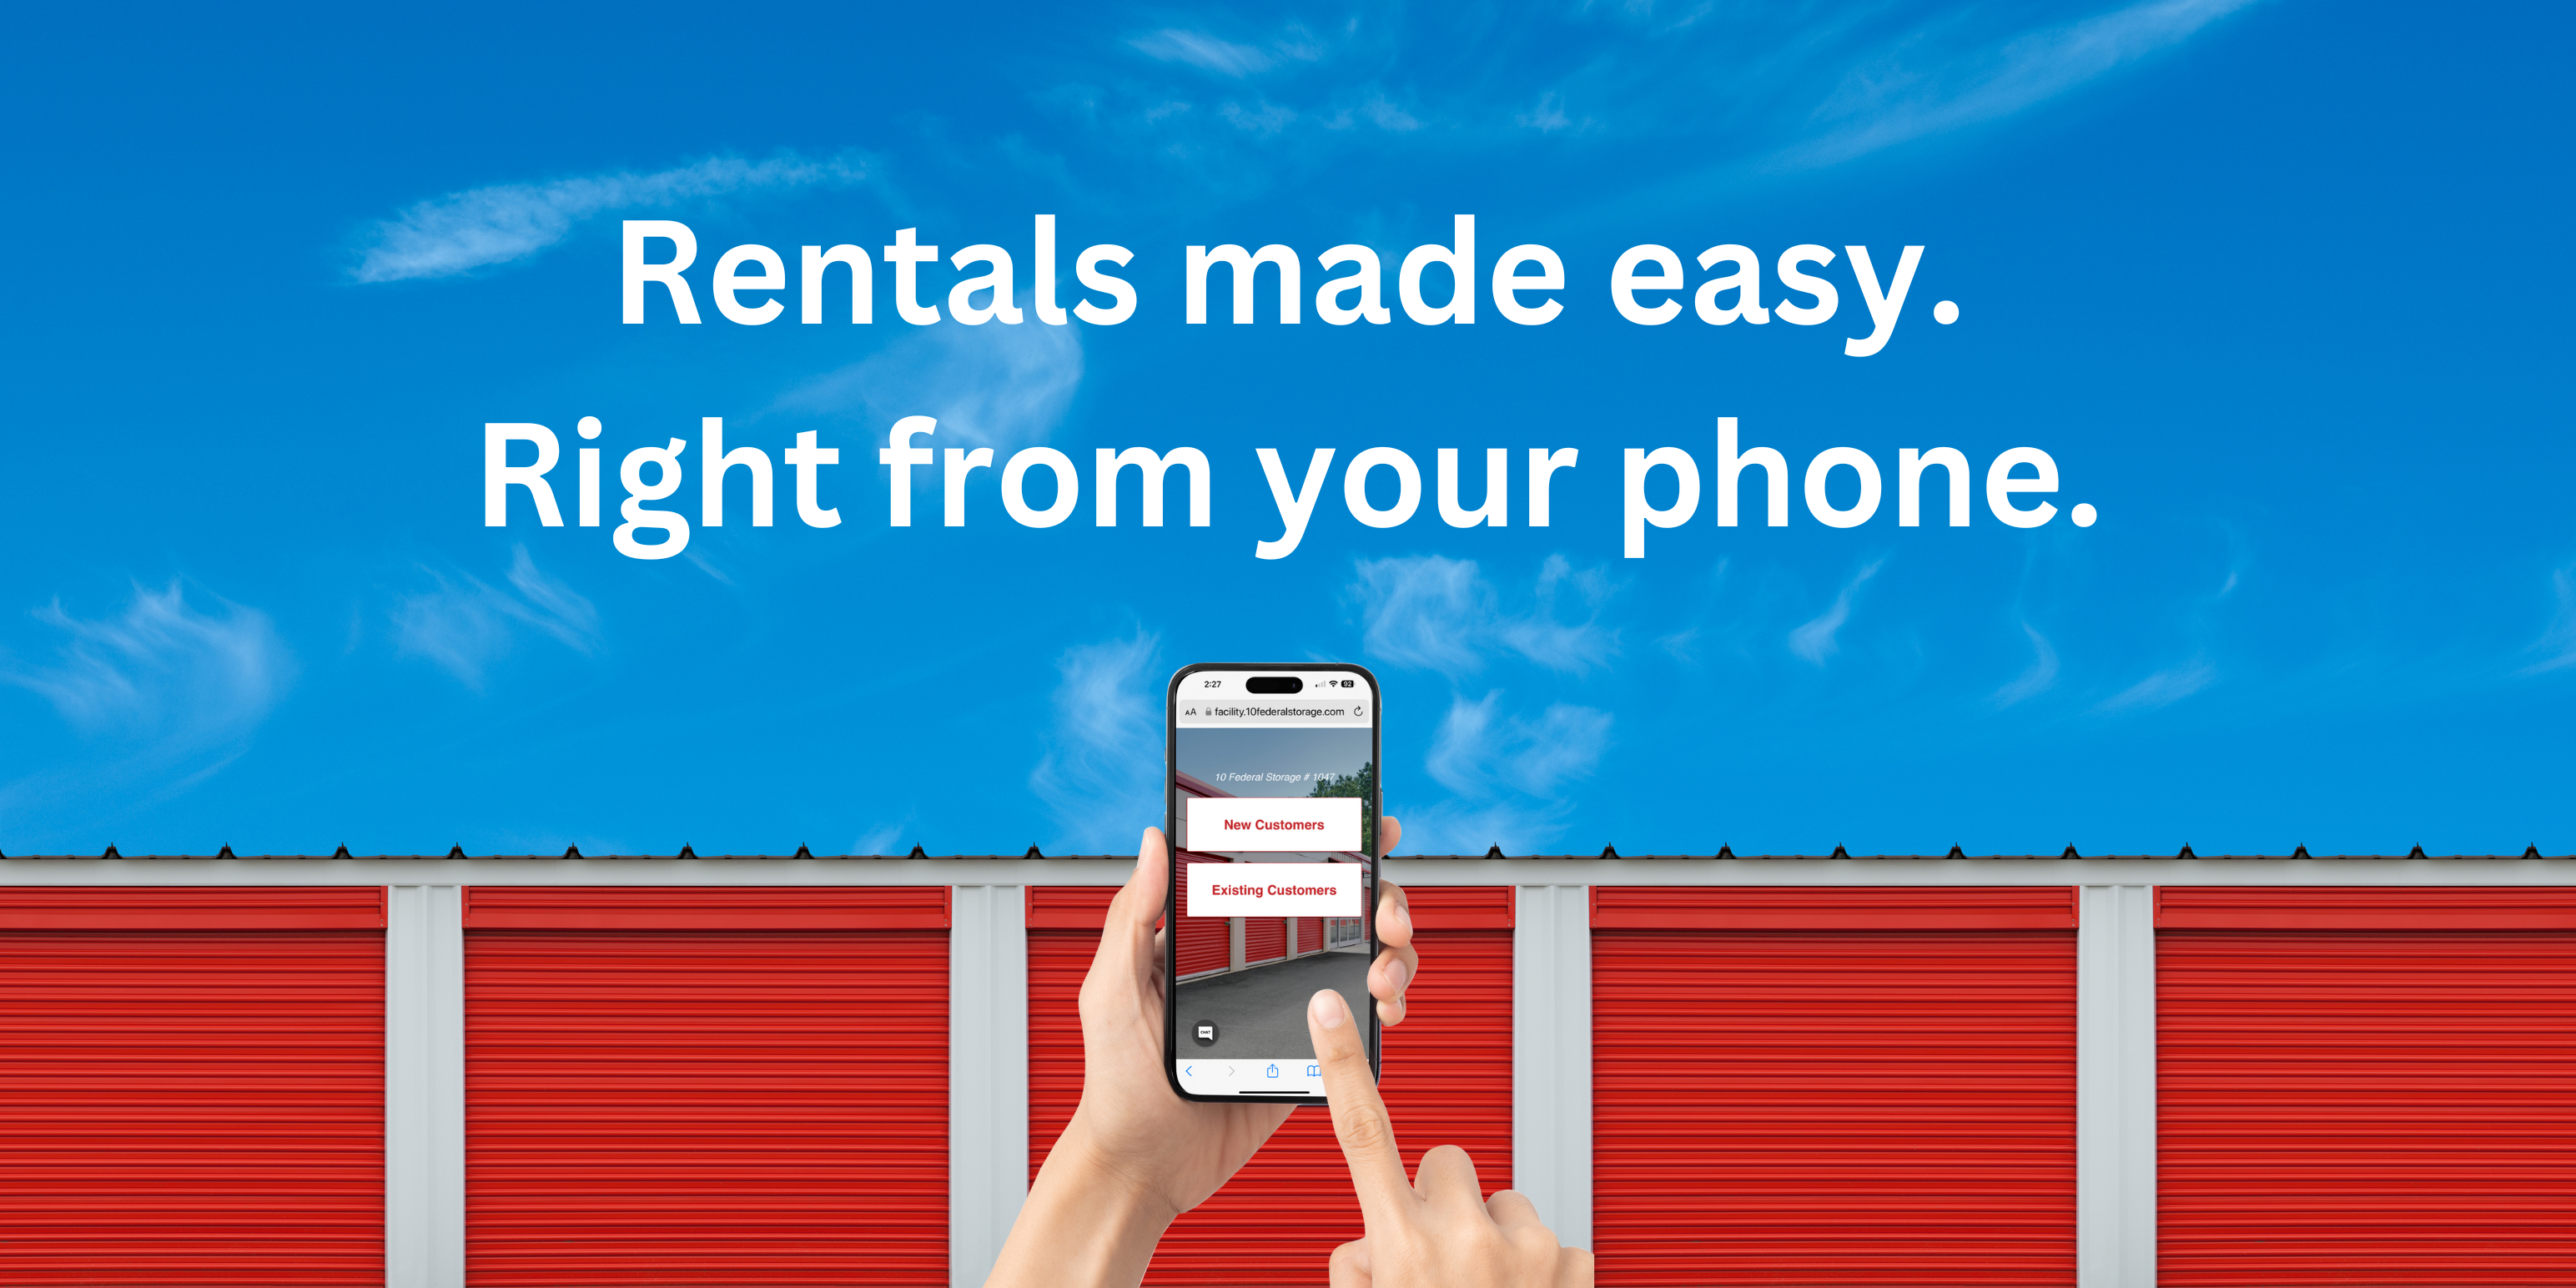 Rentals made easy. Right from your phone.